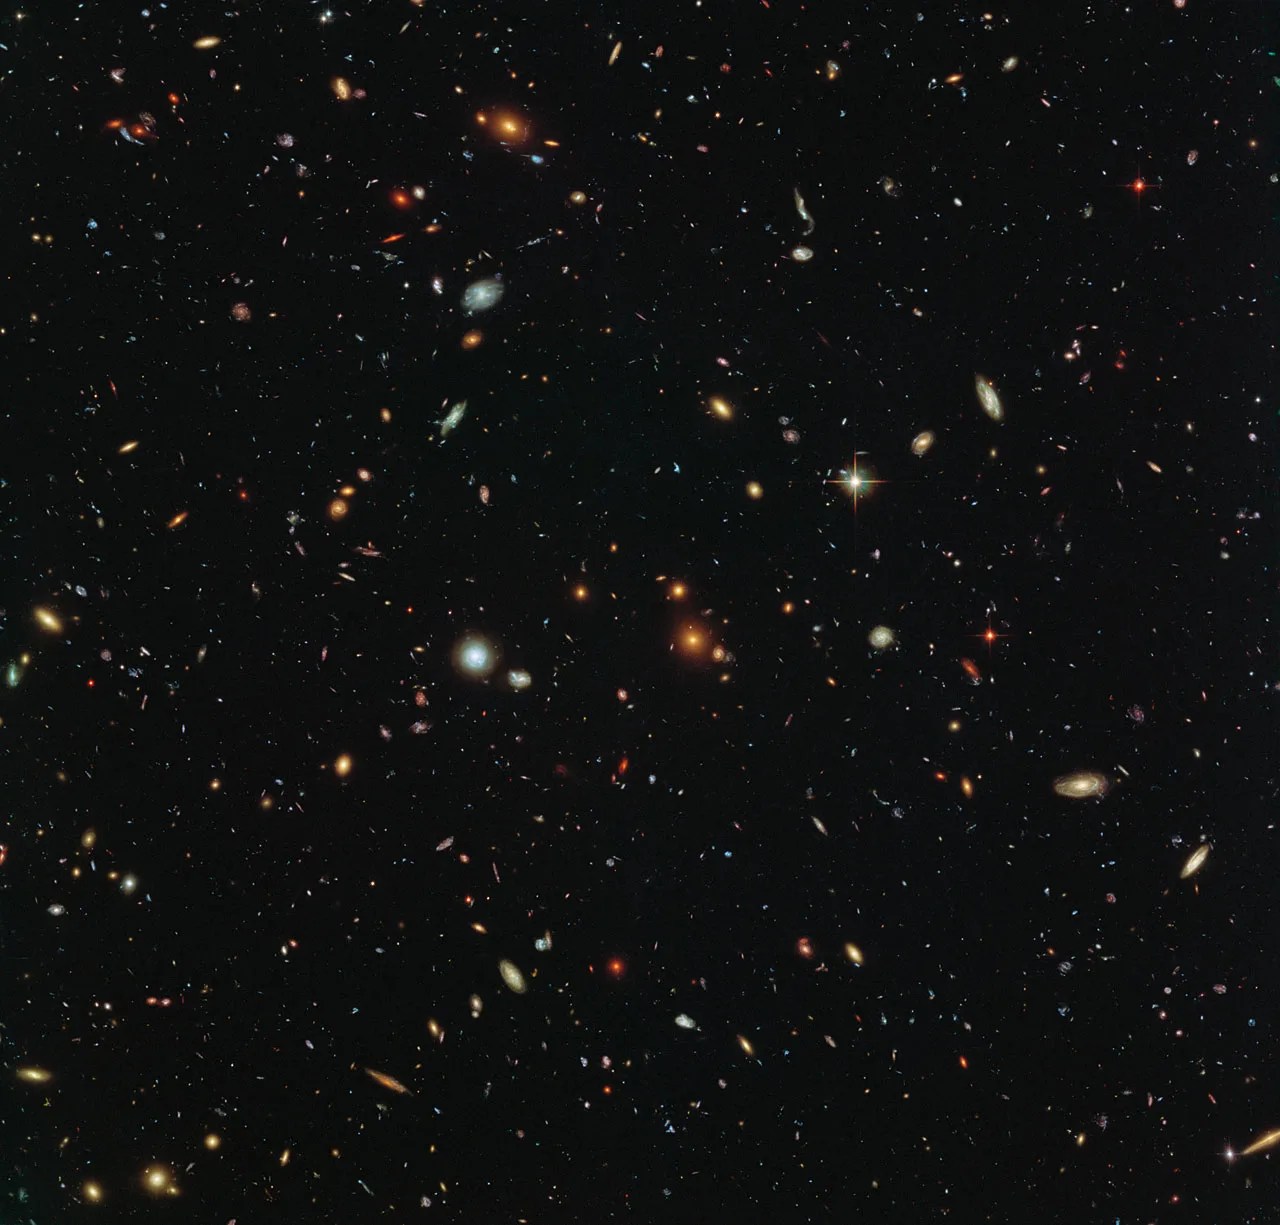 Thousands of colorful galaxies swimming in the inky blackness of space